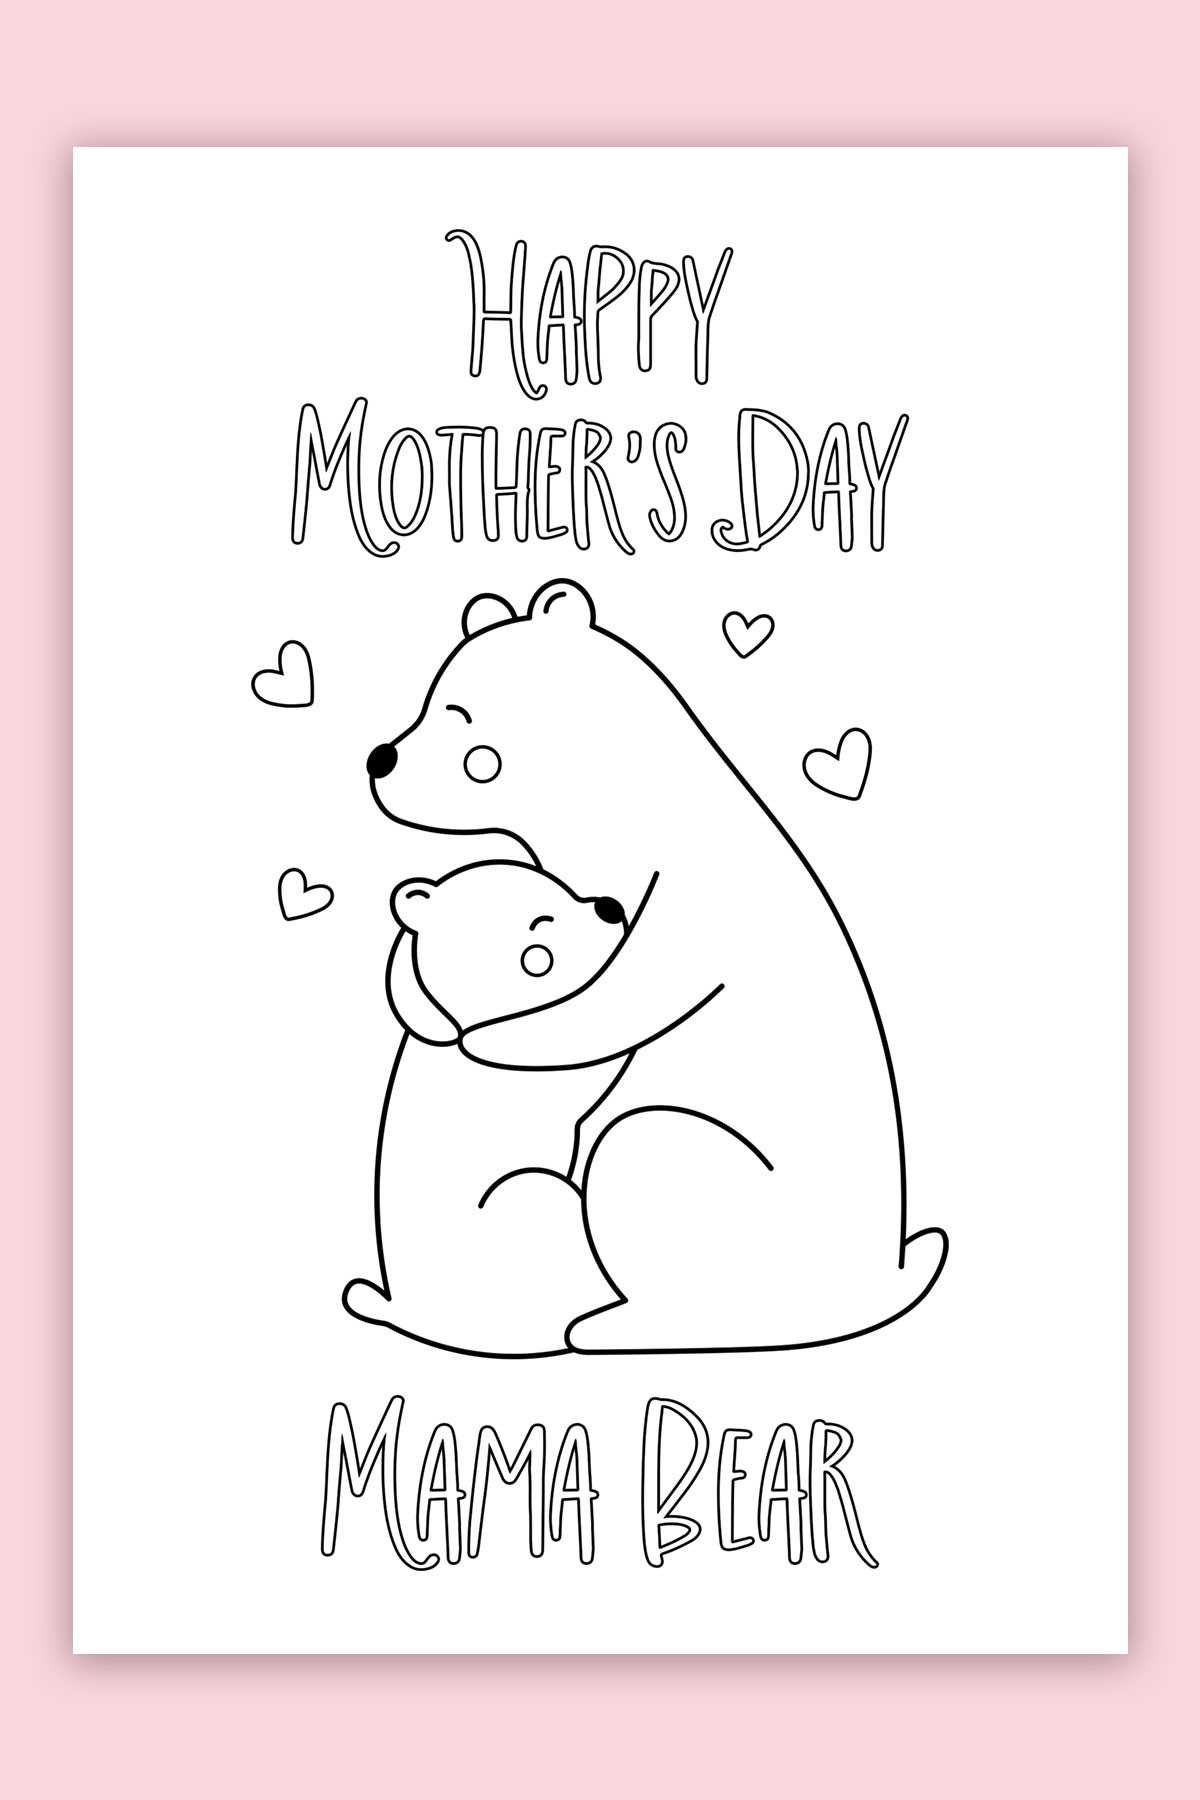 This is the picture of one of the free printable Mother's Day cards to color. This card says Happy Mother's Day Mama Bear and shows a mom bear hugging a baby bear.